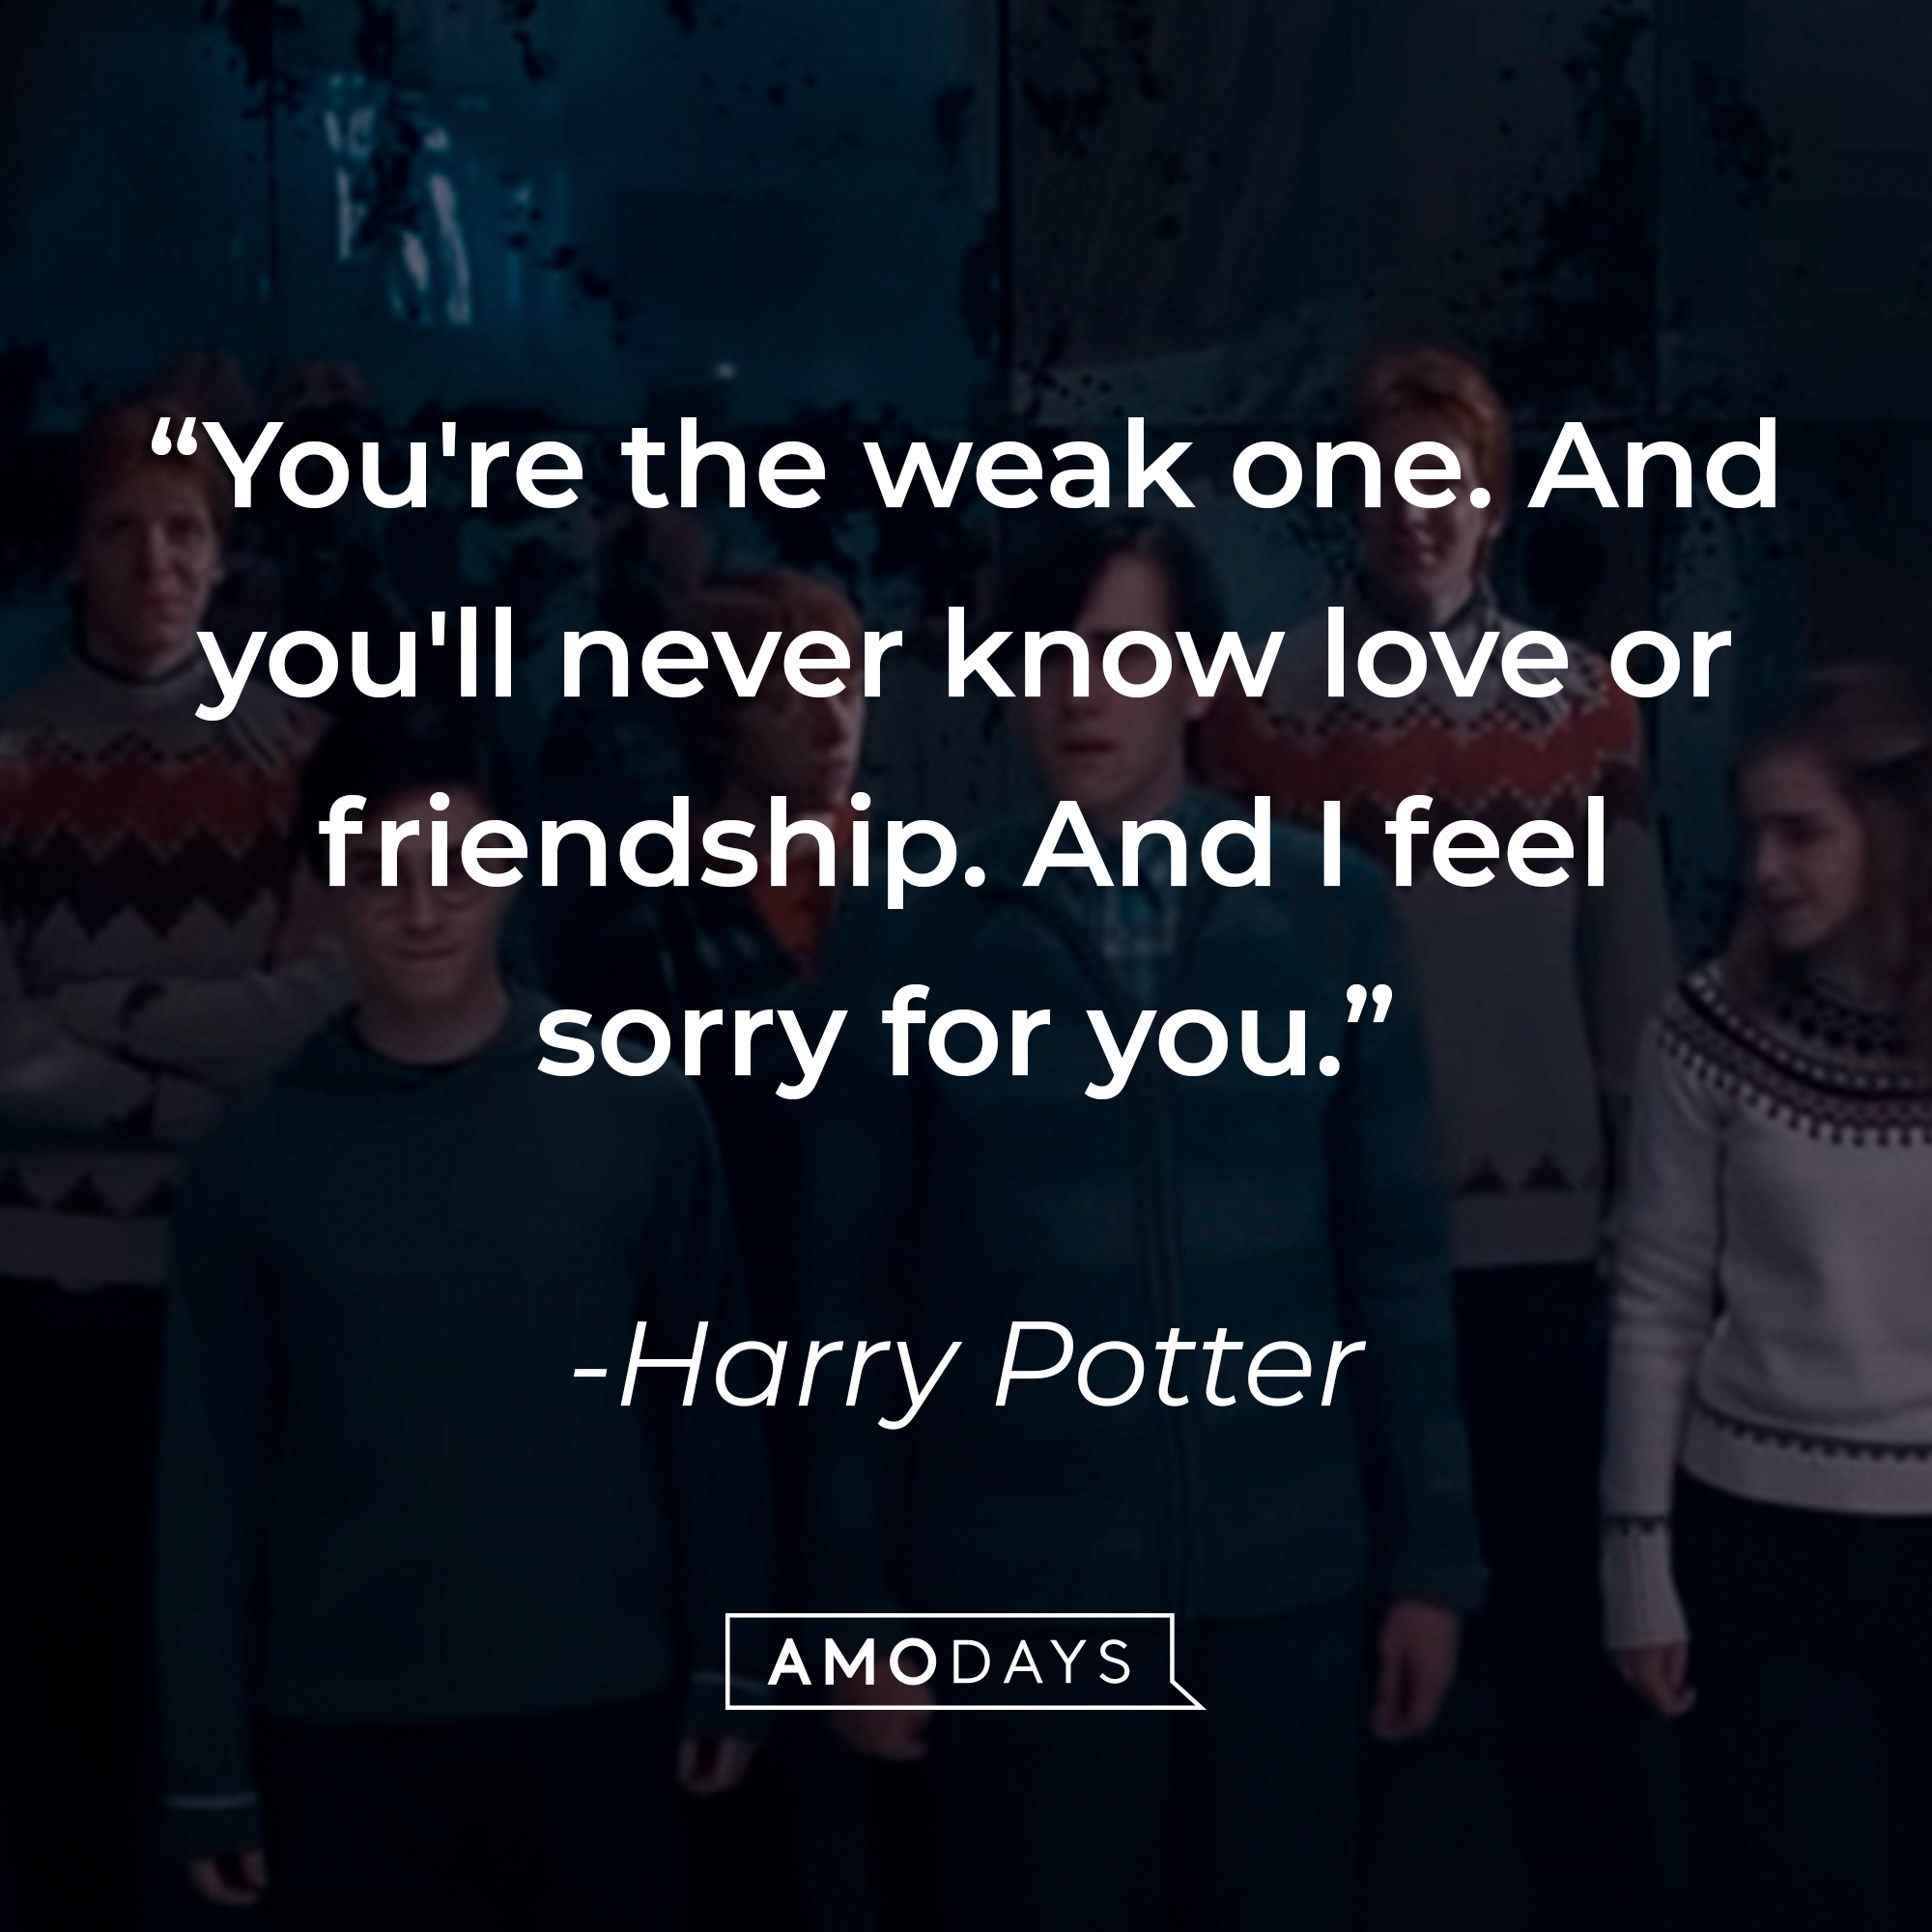 Harry Potter's quote: “You're the weak one. And you'll never know love or friendship. And I feel sorry for you.” | Source: youtube.com/harrypotter